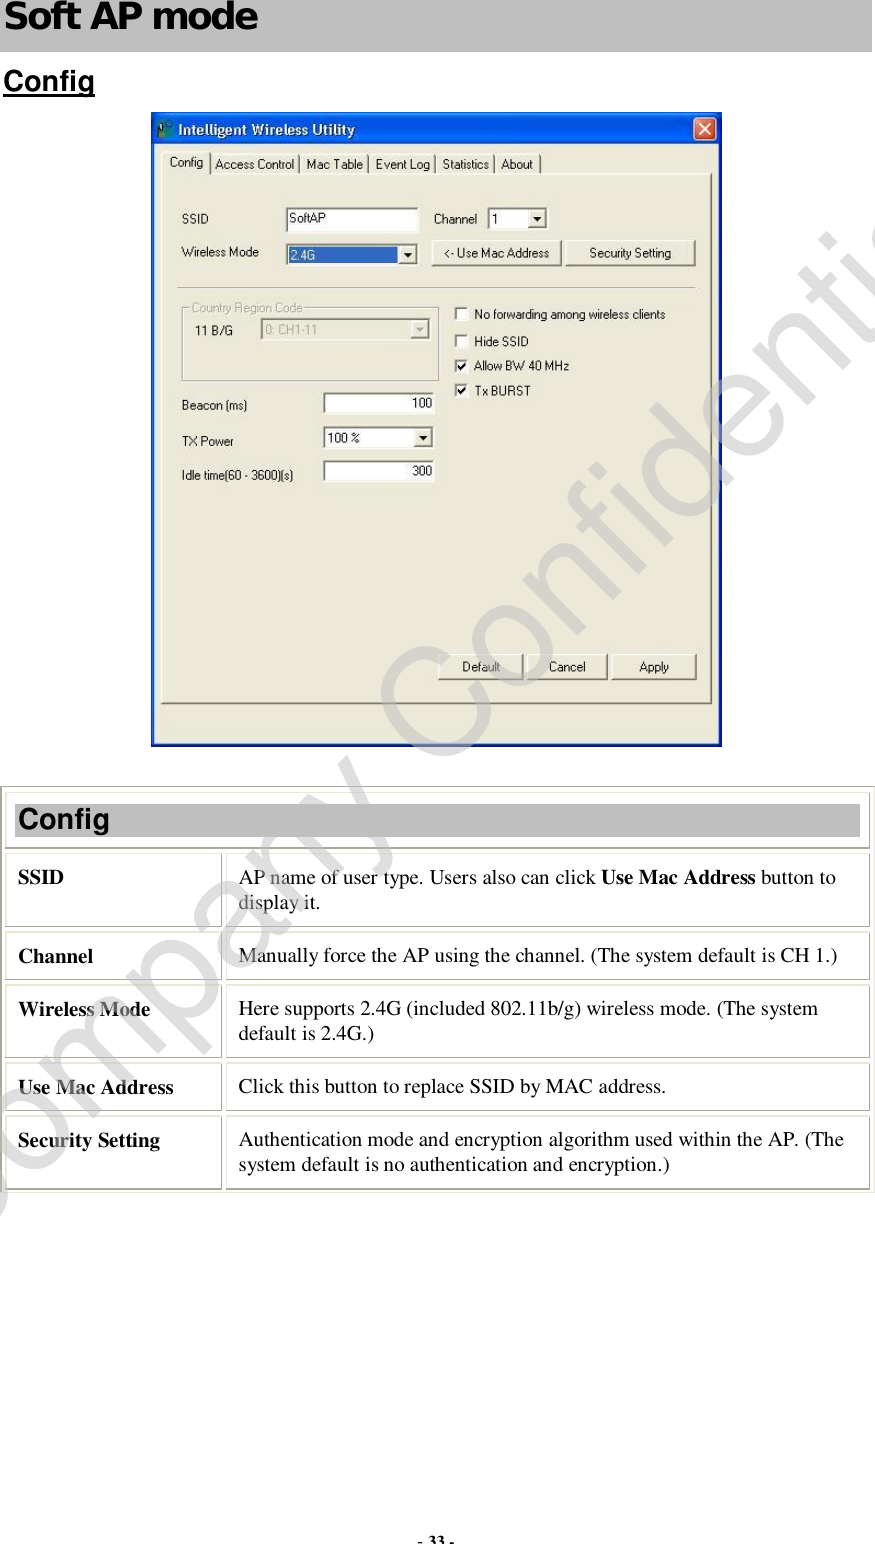  - 33 - Soft AP mode Config   Config SSID   AP name of user type. Users also can click Use Mac Address button to display it. Channel  Manually force the AP using the channel. (The system default is CH 1.) Wireless Mode  Here supports 2.4G (included 802.11b/g) wireless mode. (The system default is 2.4G.) Use Mac Address  Click this button to replace SSID by MAC address. Security Setting  Authentication mode and encryption algorithm used within the AP. (The system default is no authentication and encryption.) Company Confidential